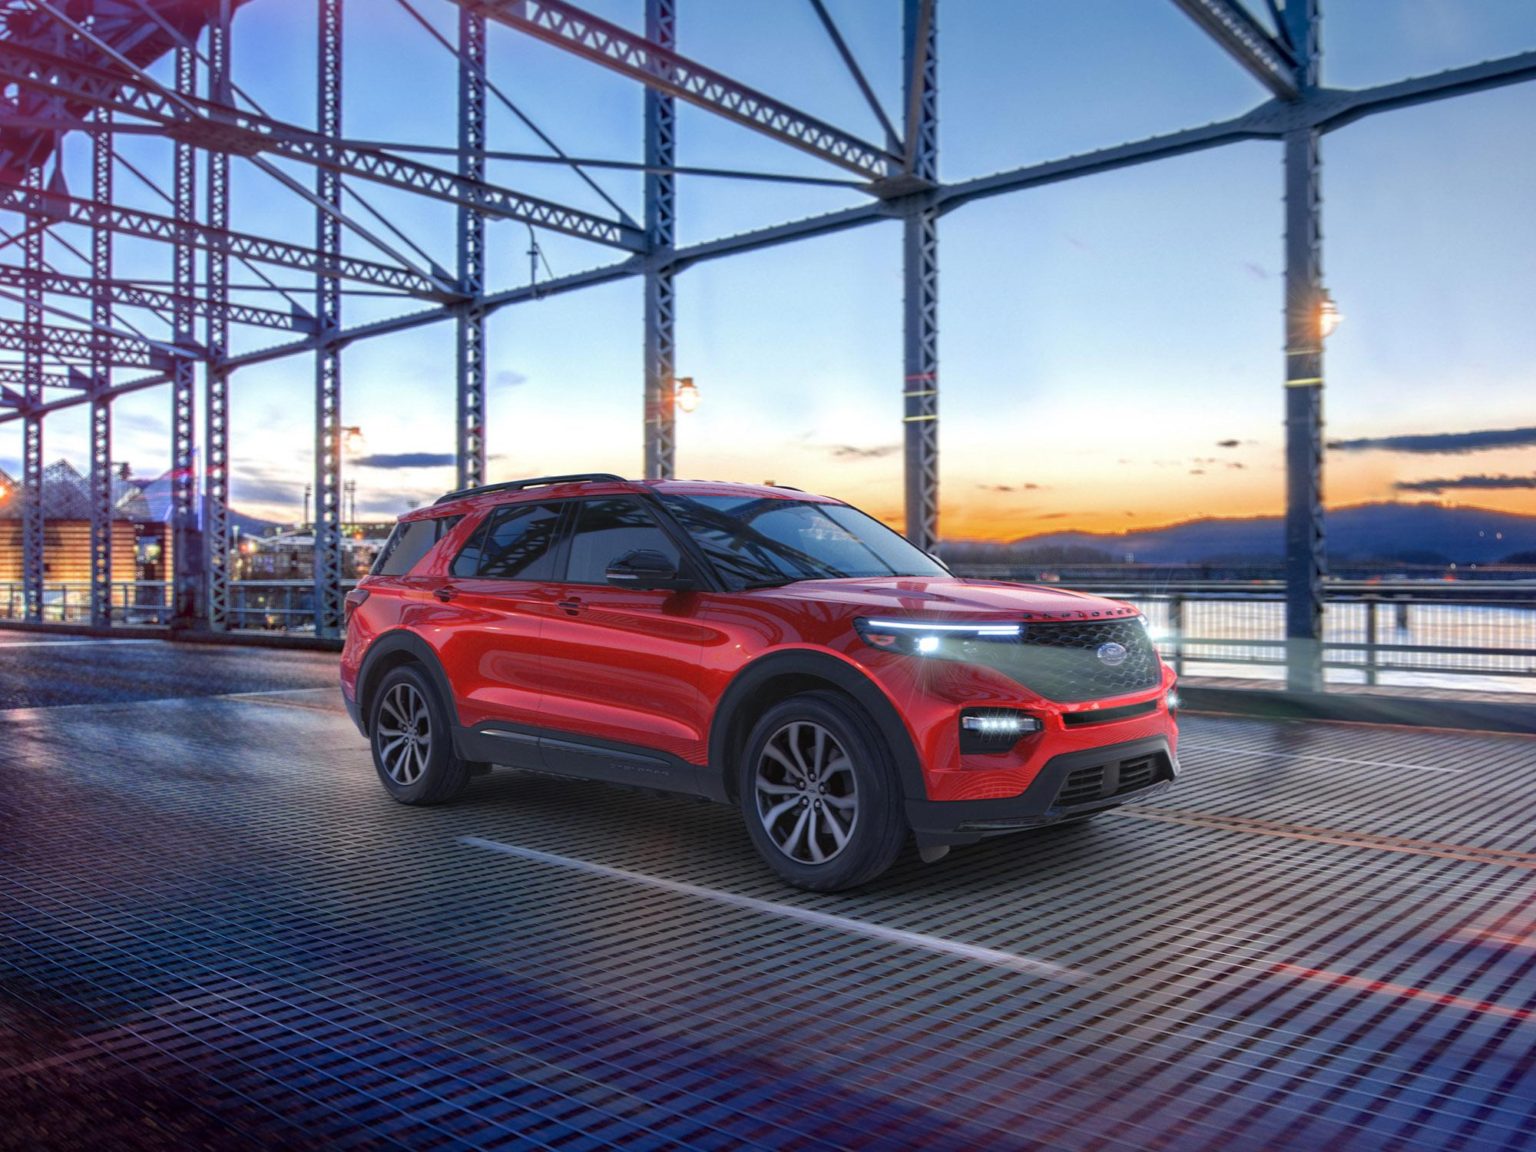 The 2021 Ford Explorer Enthusiast ST gives buyers more performance at a lower price.